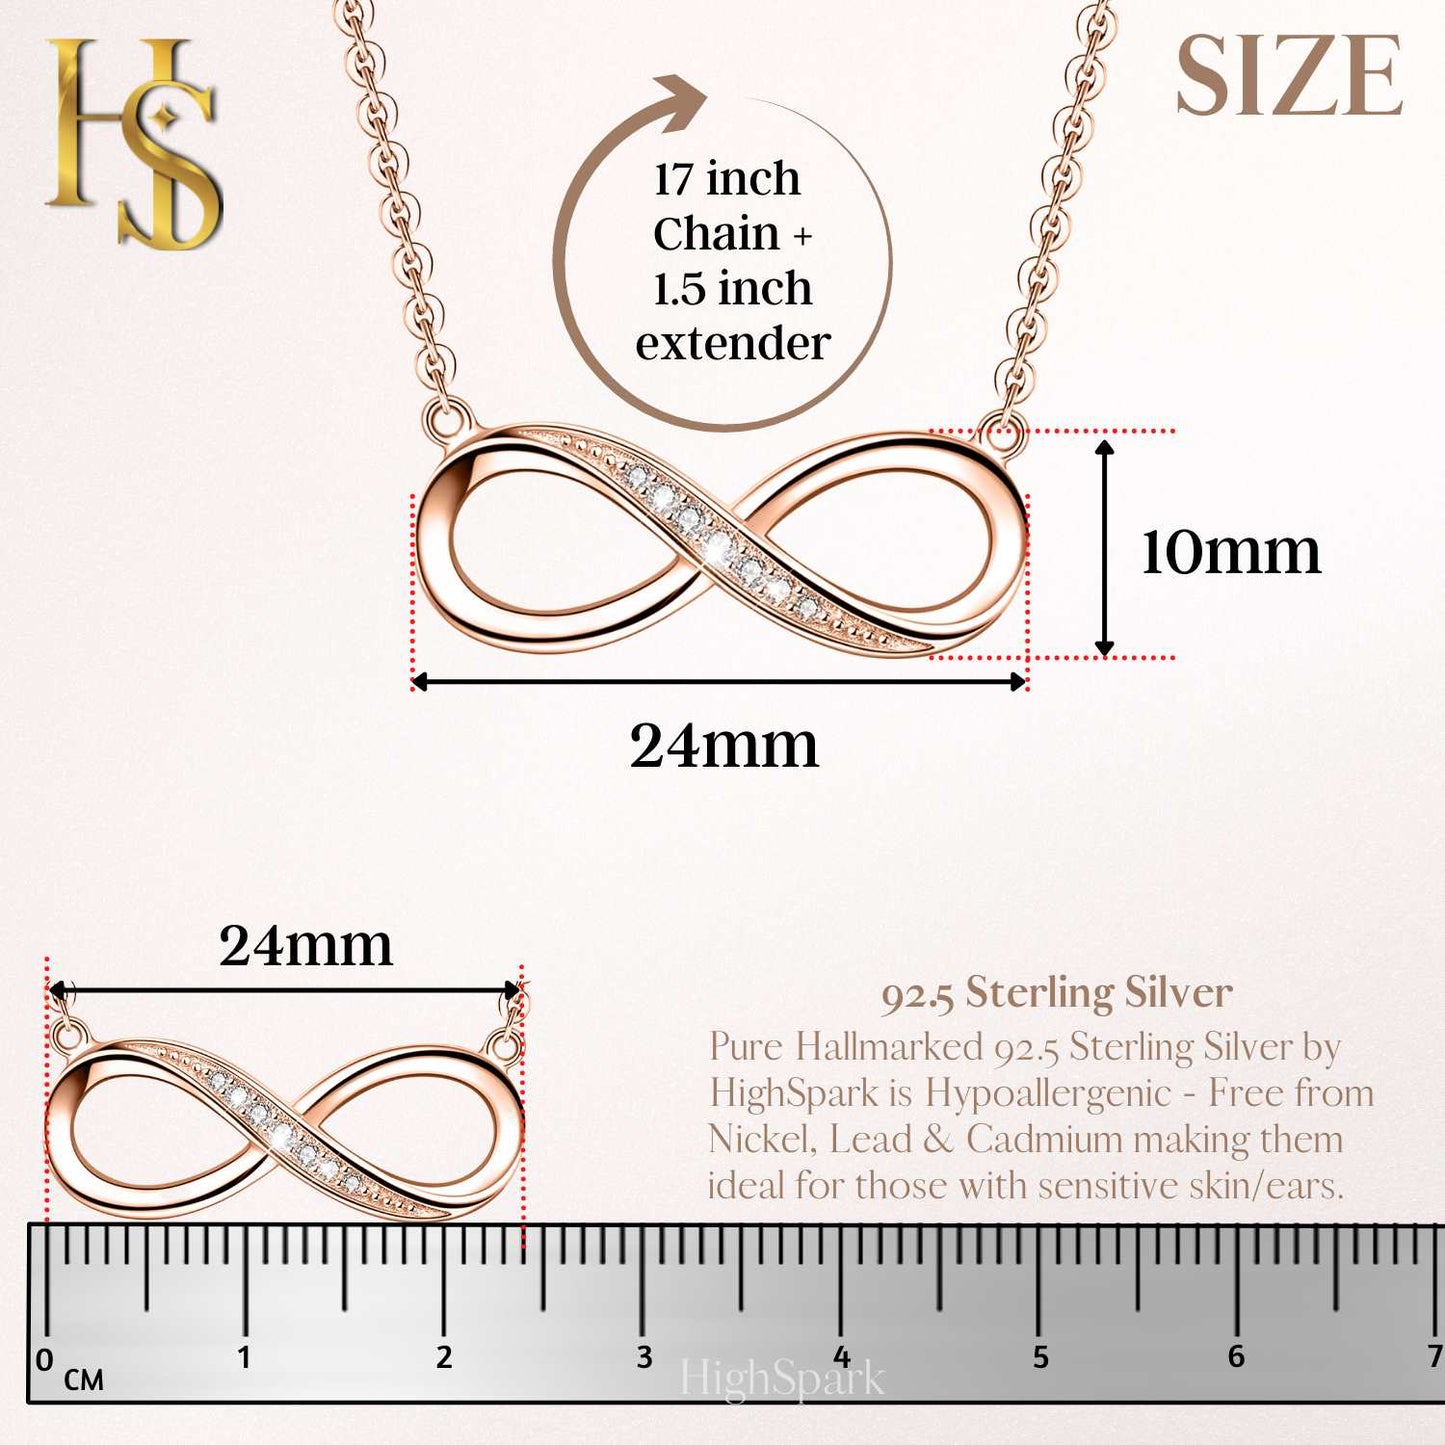 Infinity Pendant in 92.5 Silver - 18k Rose Gold finish studded with Swiss Zirconia